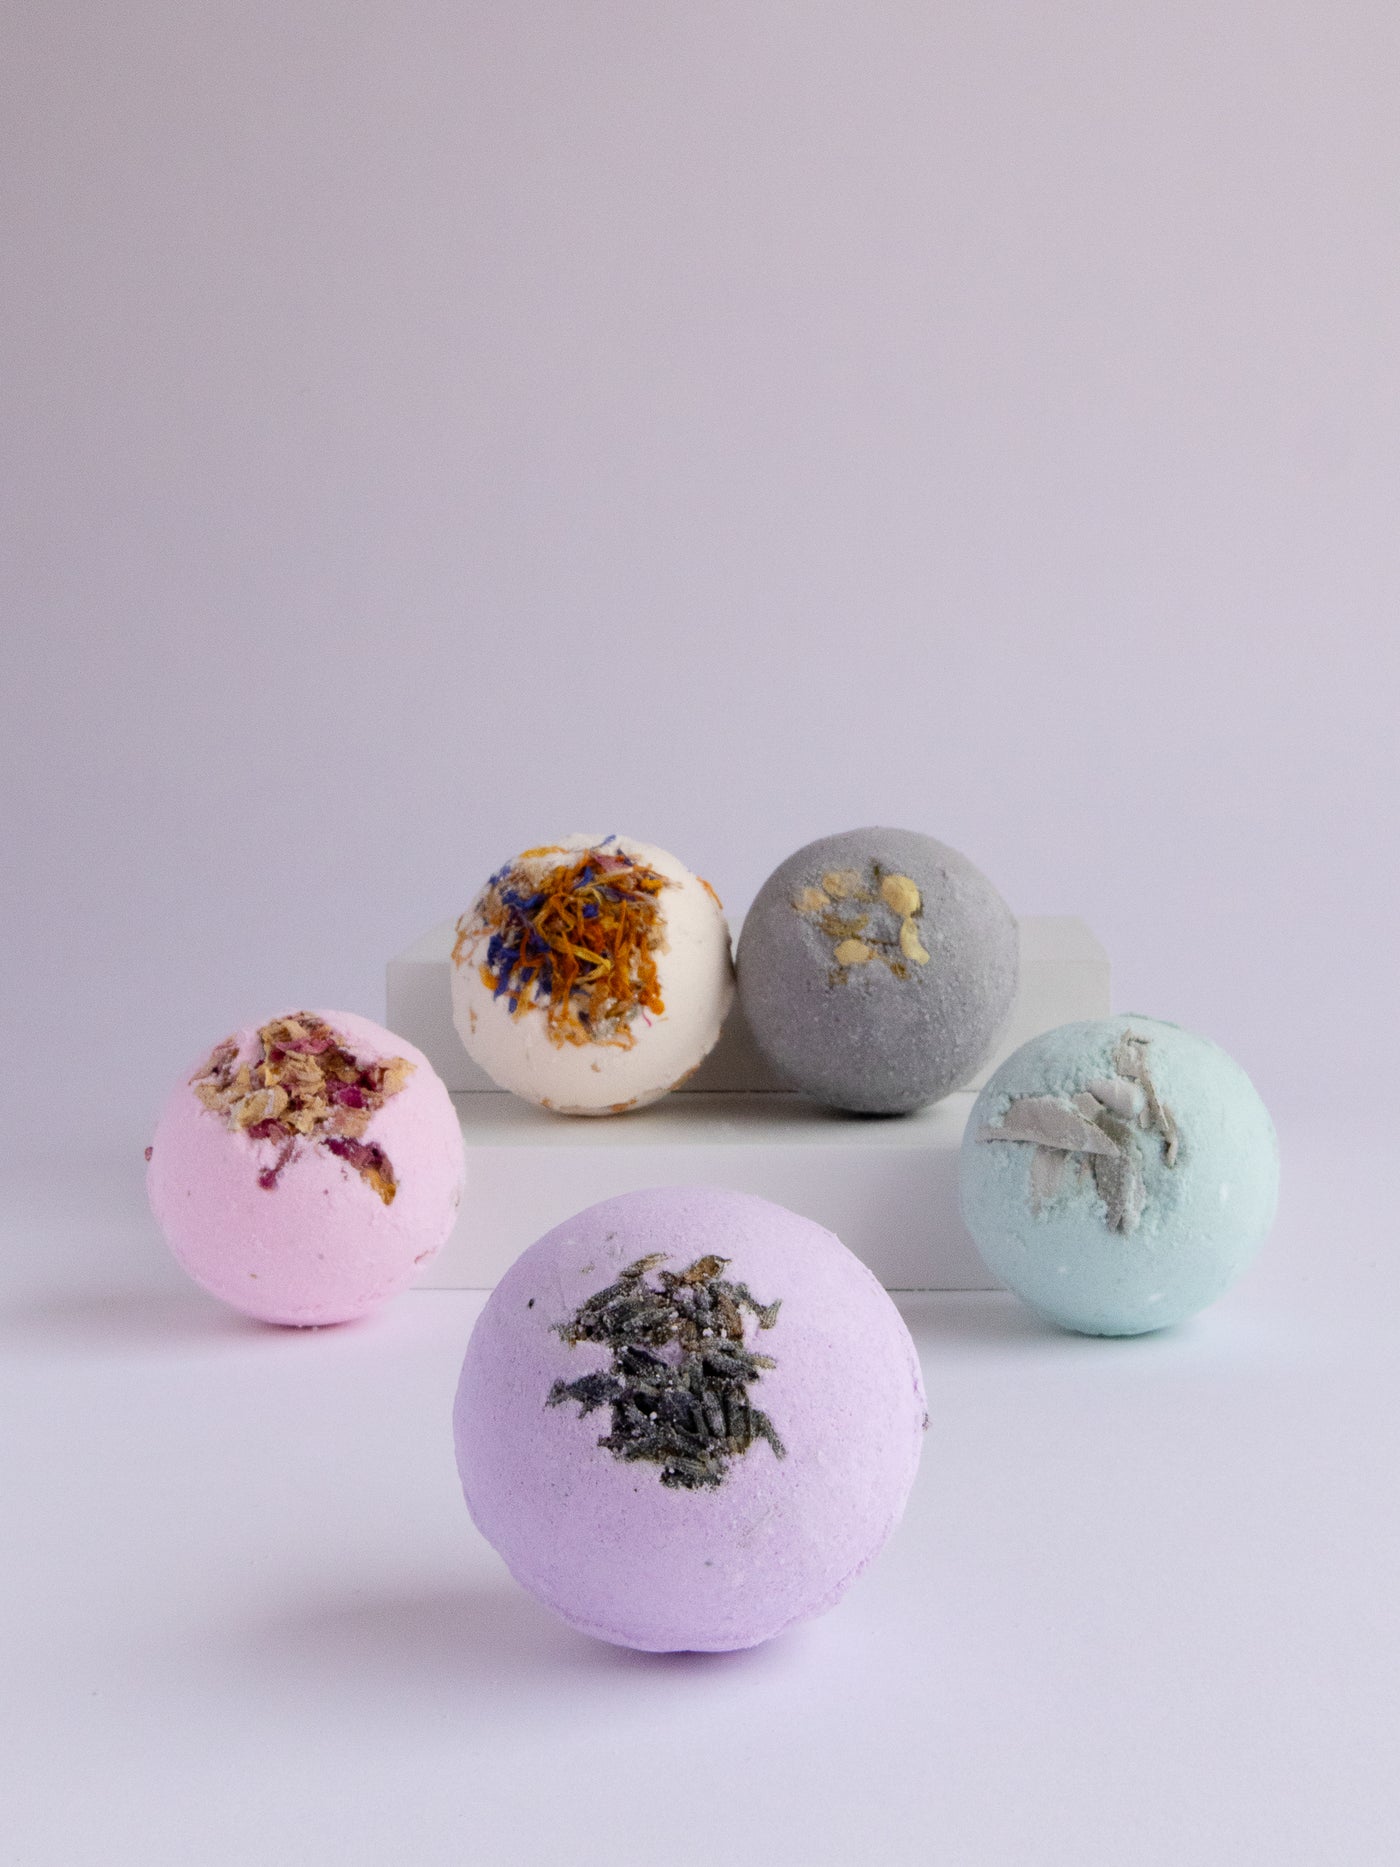 The Lavender Love Bomb is made with coconut oil, dried lavender and lavender essential oil. This bomb will leave you feeling relaxed and stress-free! Handmade in Ojai, CA.